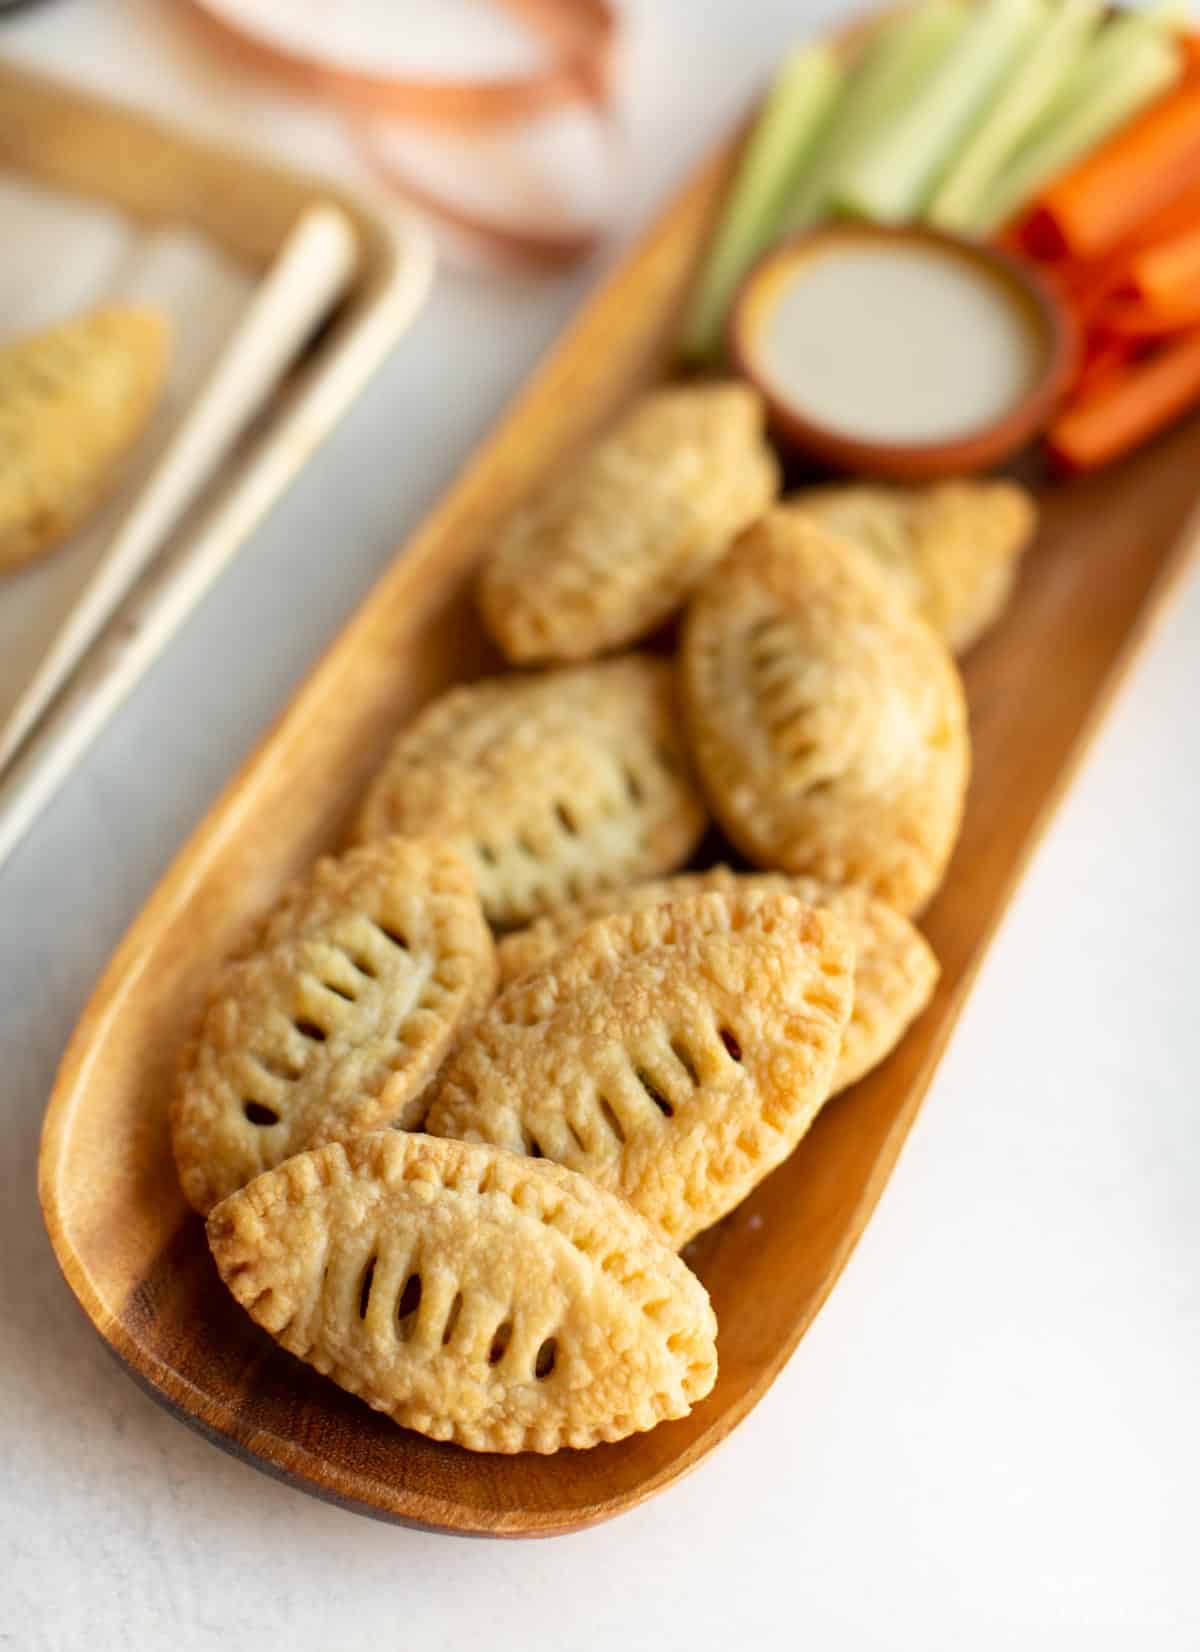 Football shaped vegan puff pastry appetizers on a serving board.